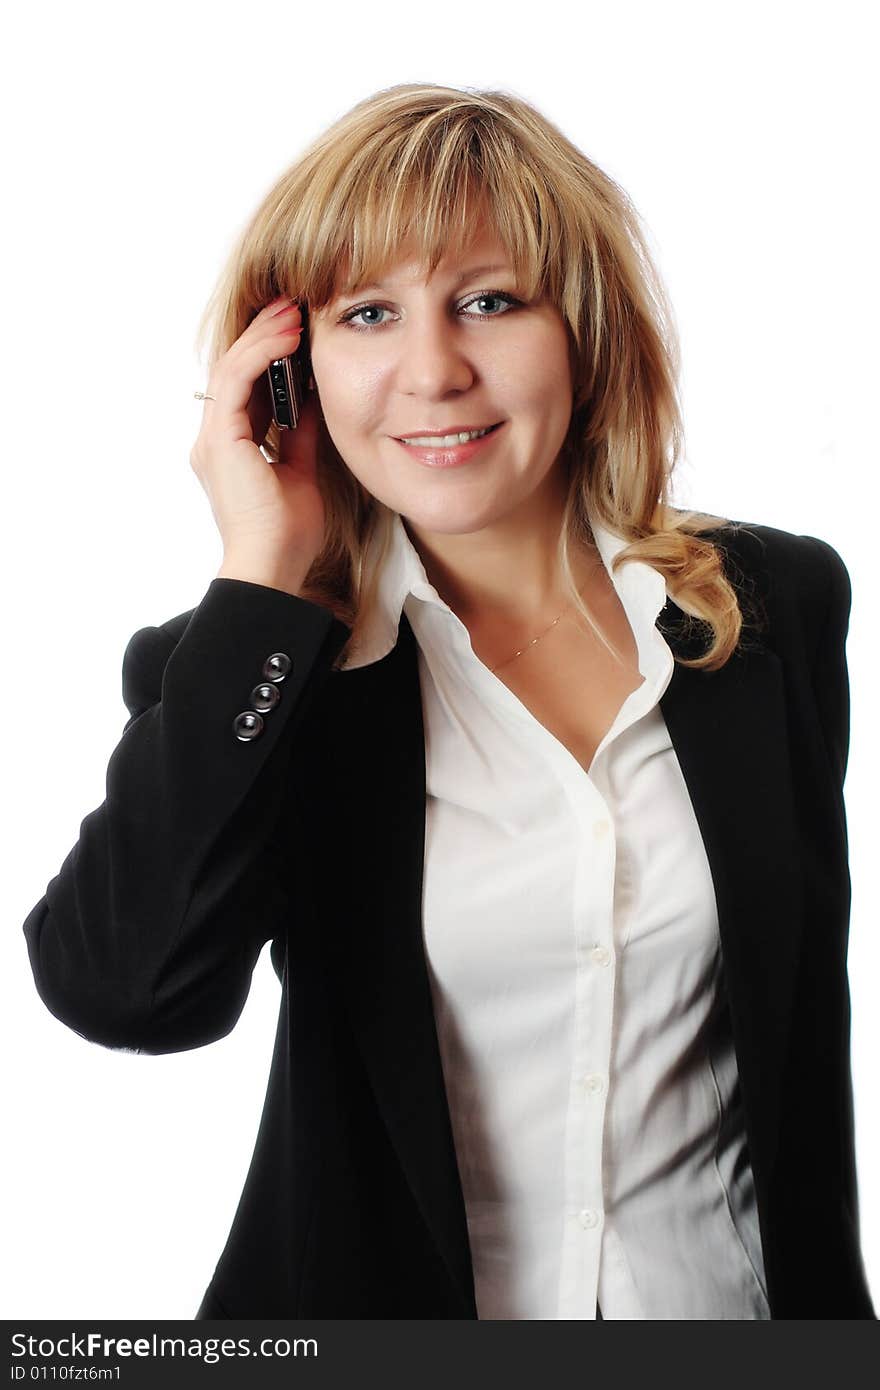 Successful smiling woman talking on mobile phone.